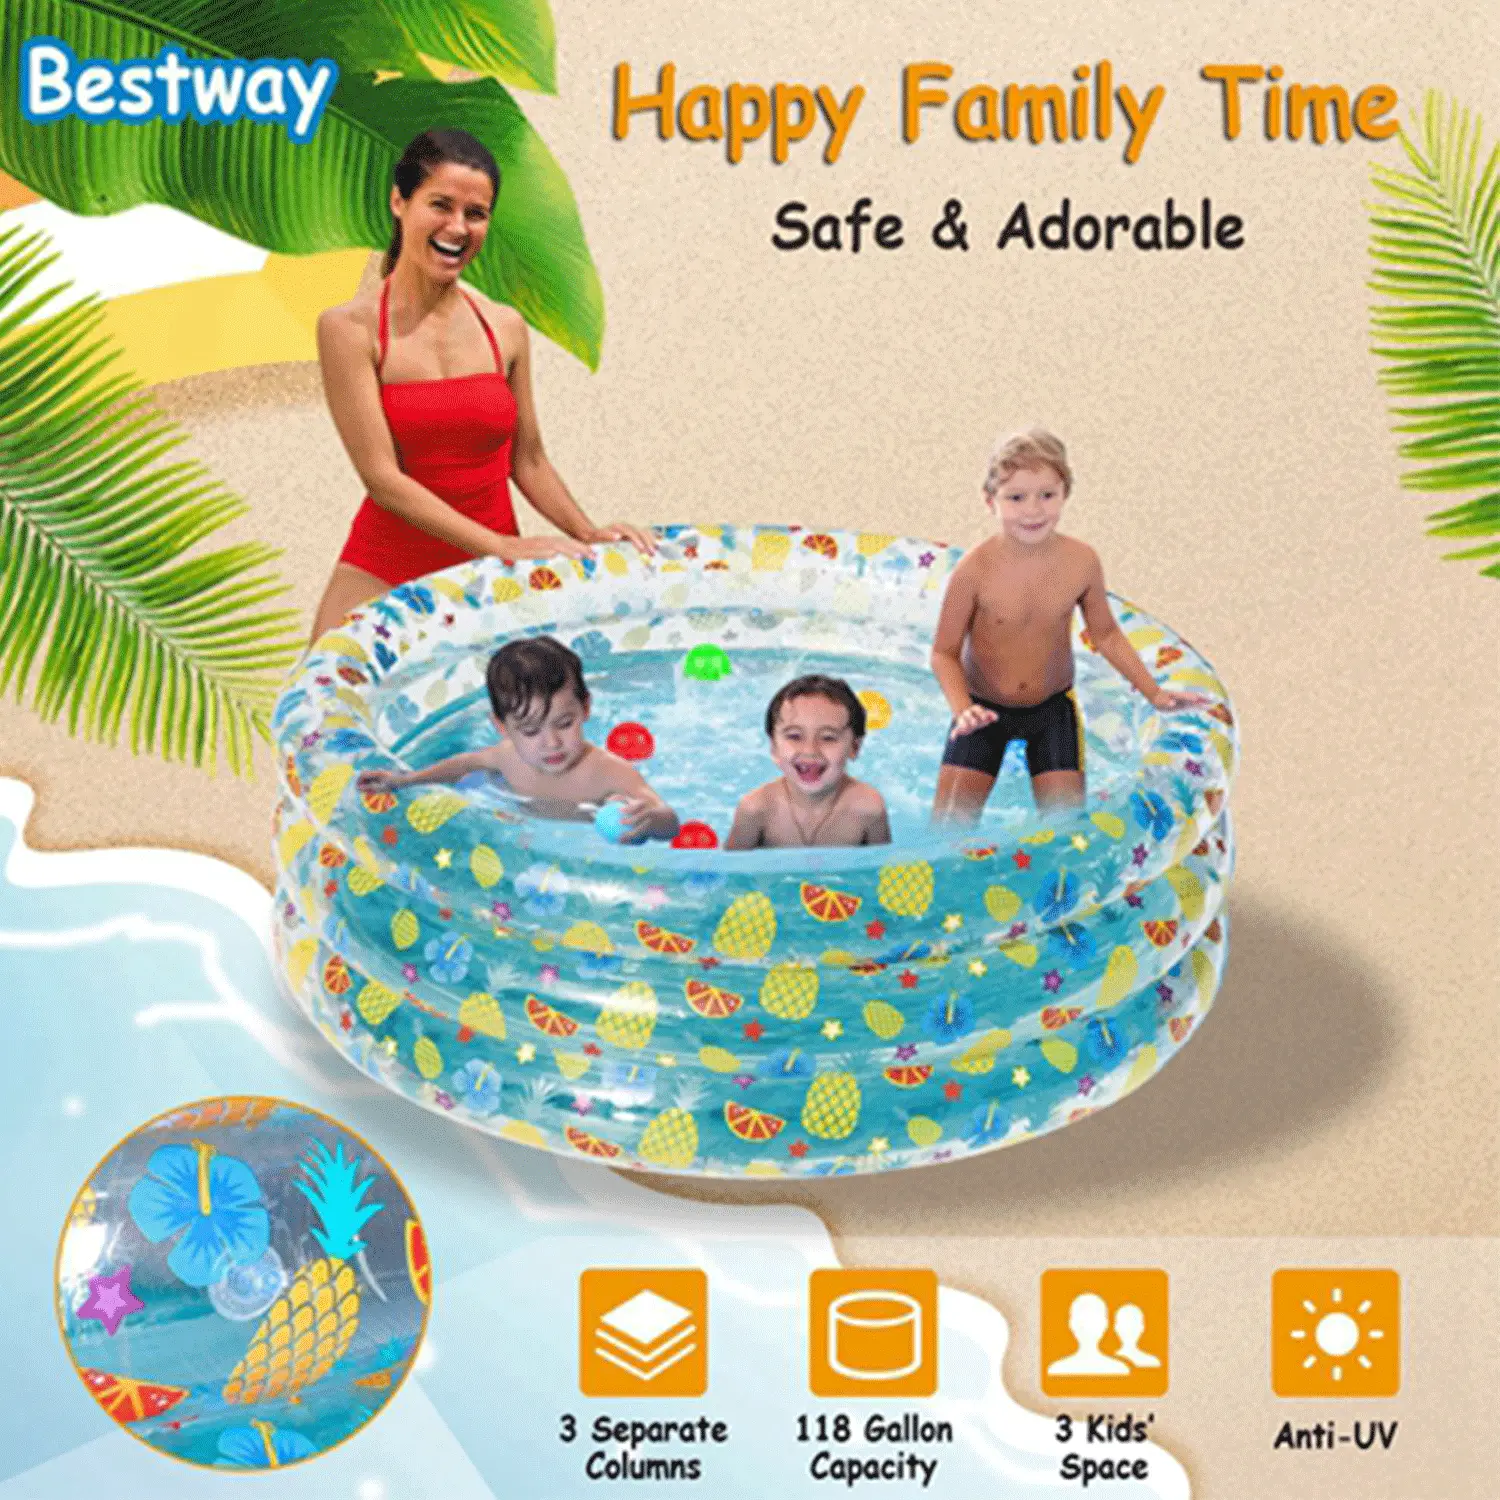 Inflatable Swimming Pool - 59" x 59" x 21"